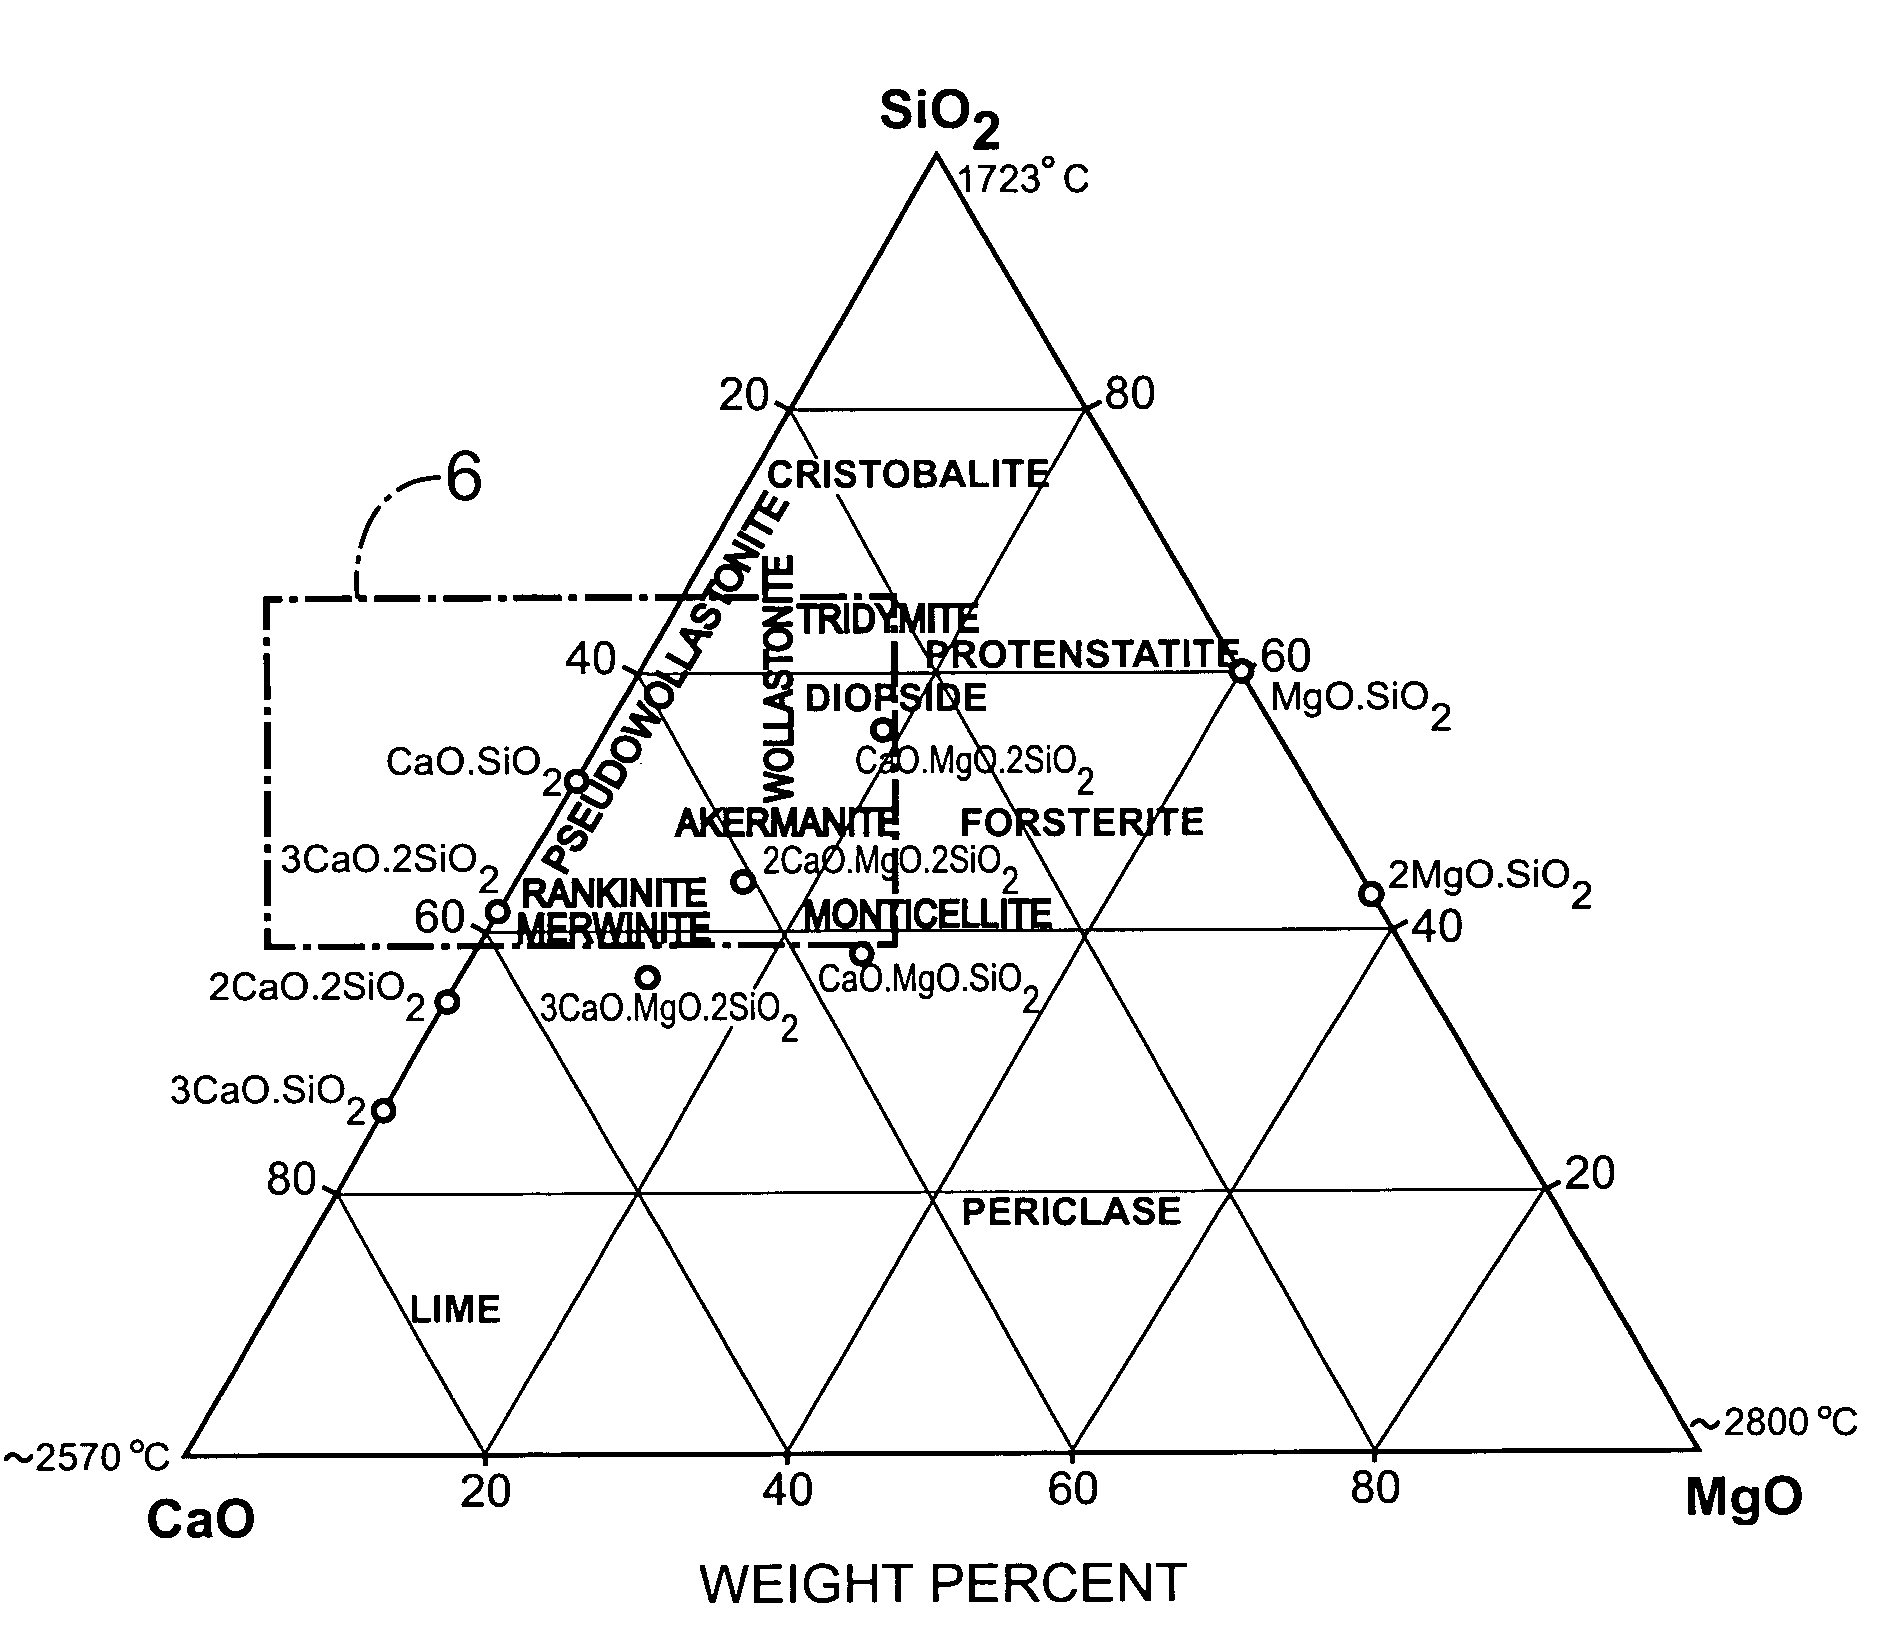 Ceramic with improved high temperature electrical properties for use as a spark plug insulator